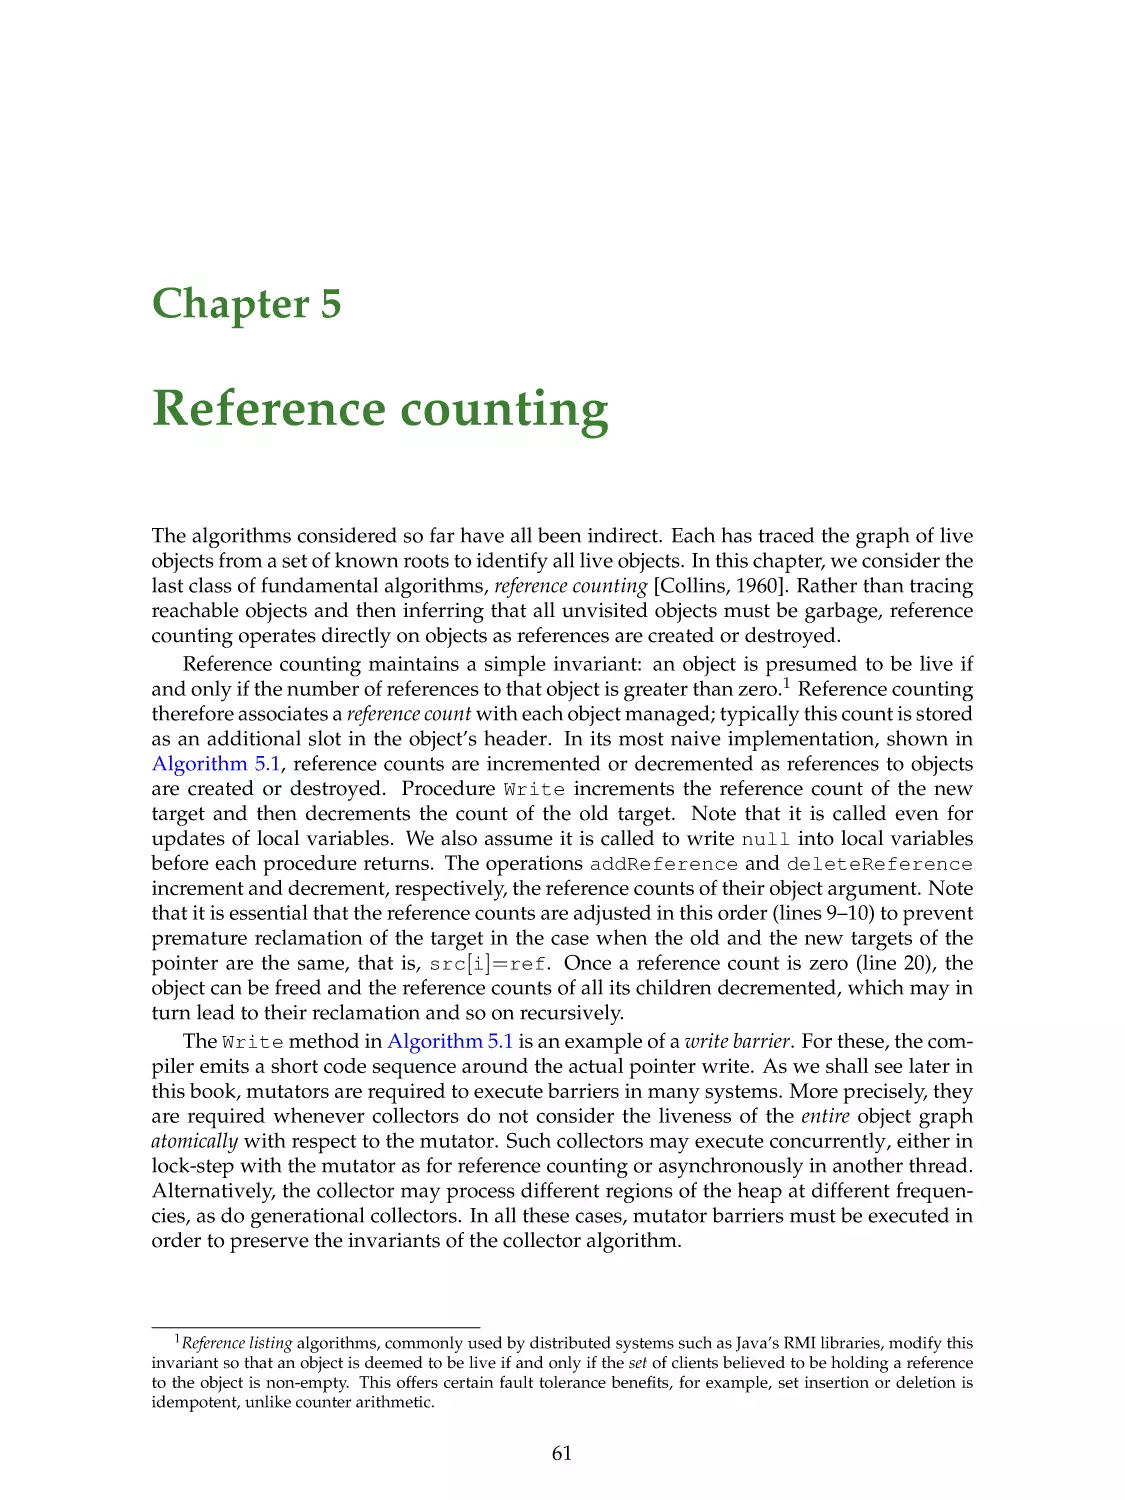 5. Reference counting